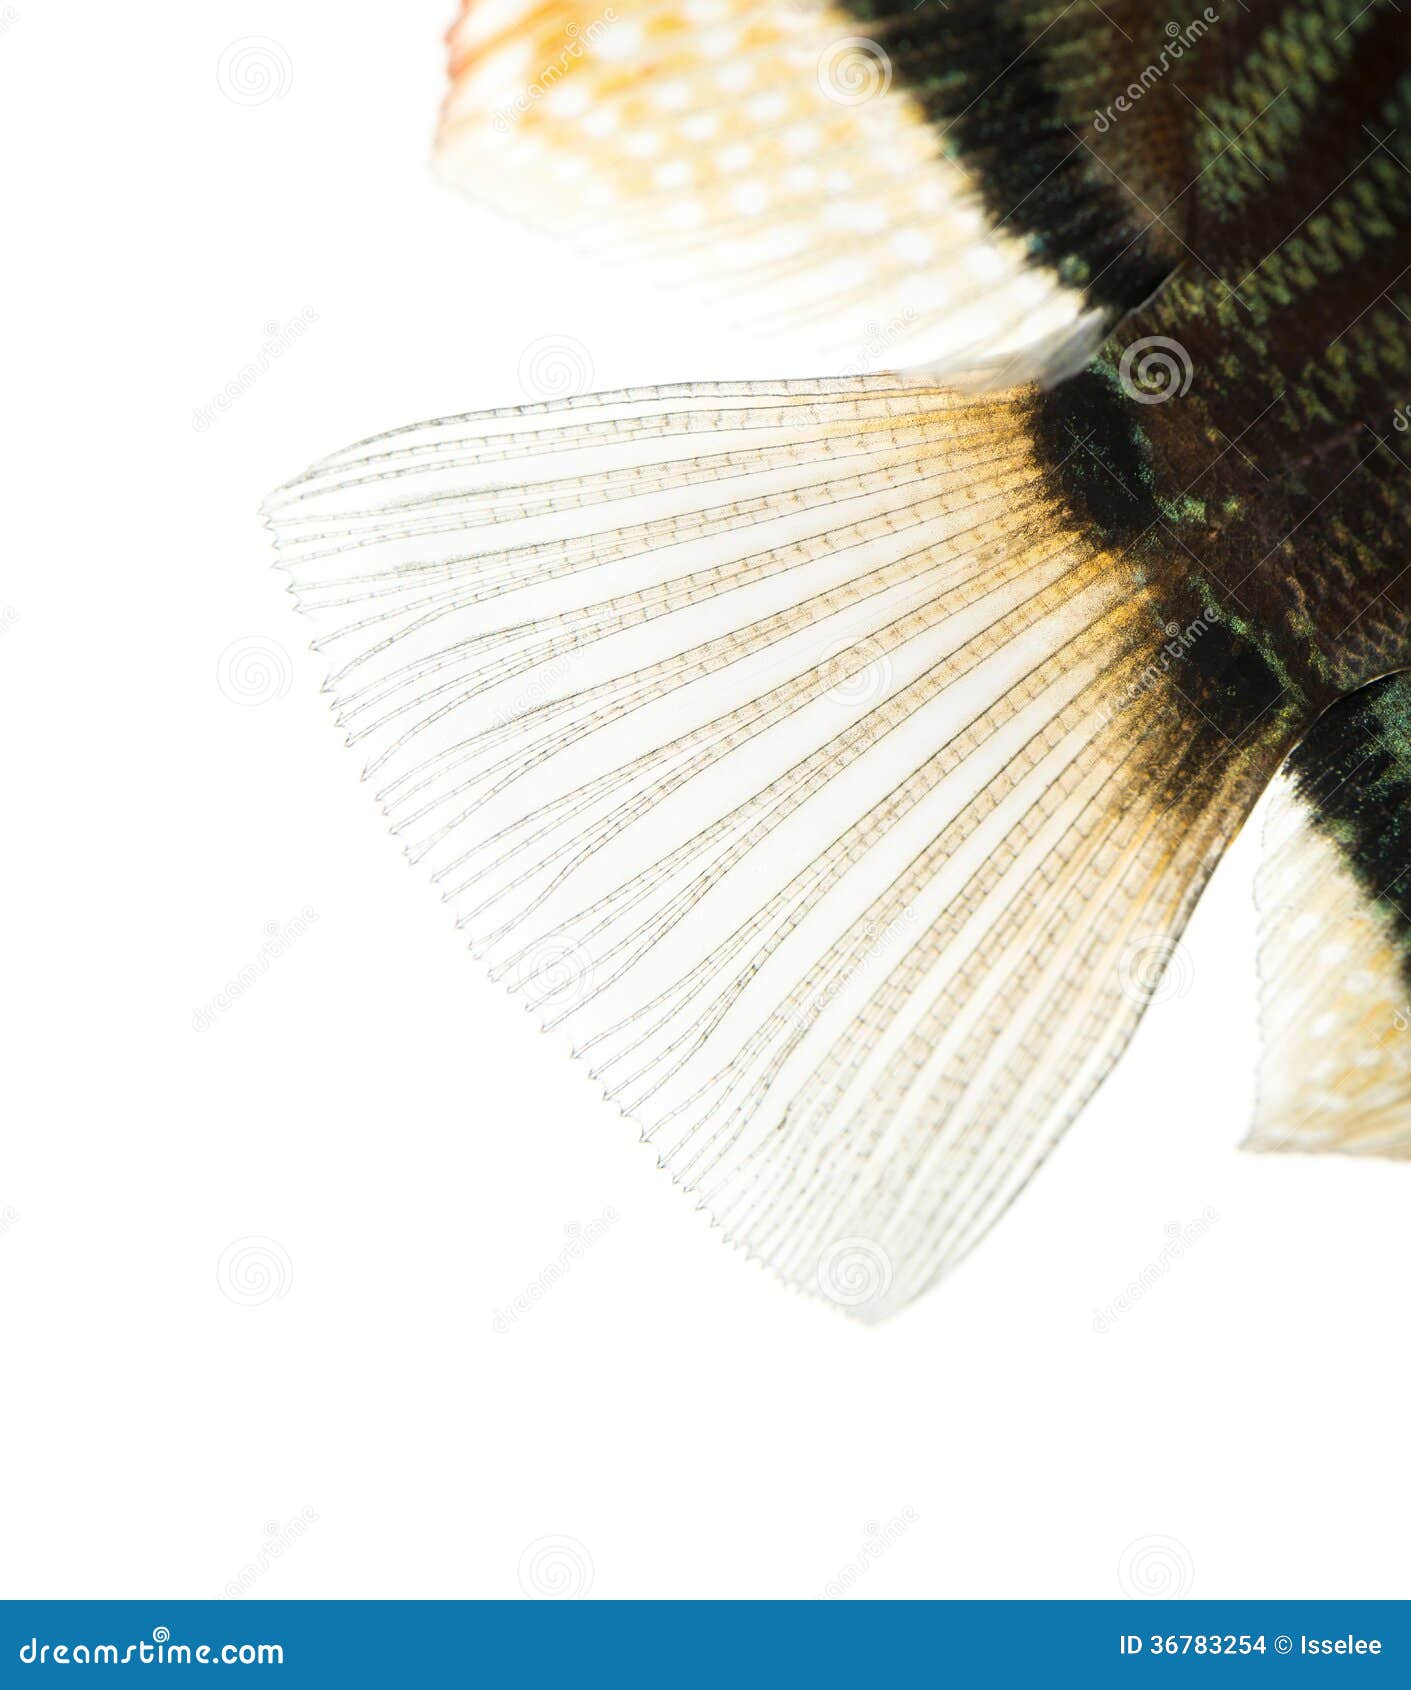 close-up of a blue snakeskin discus' caudal fin